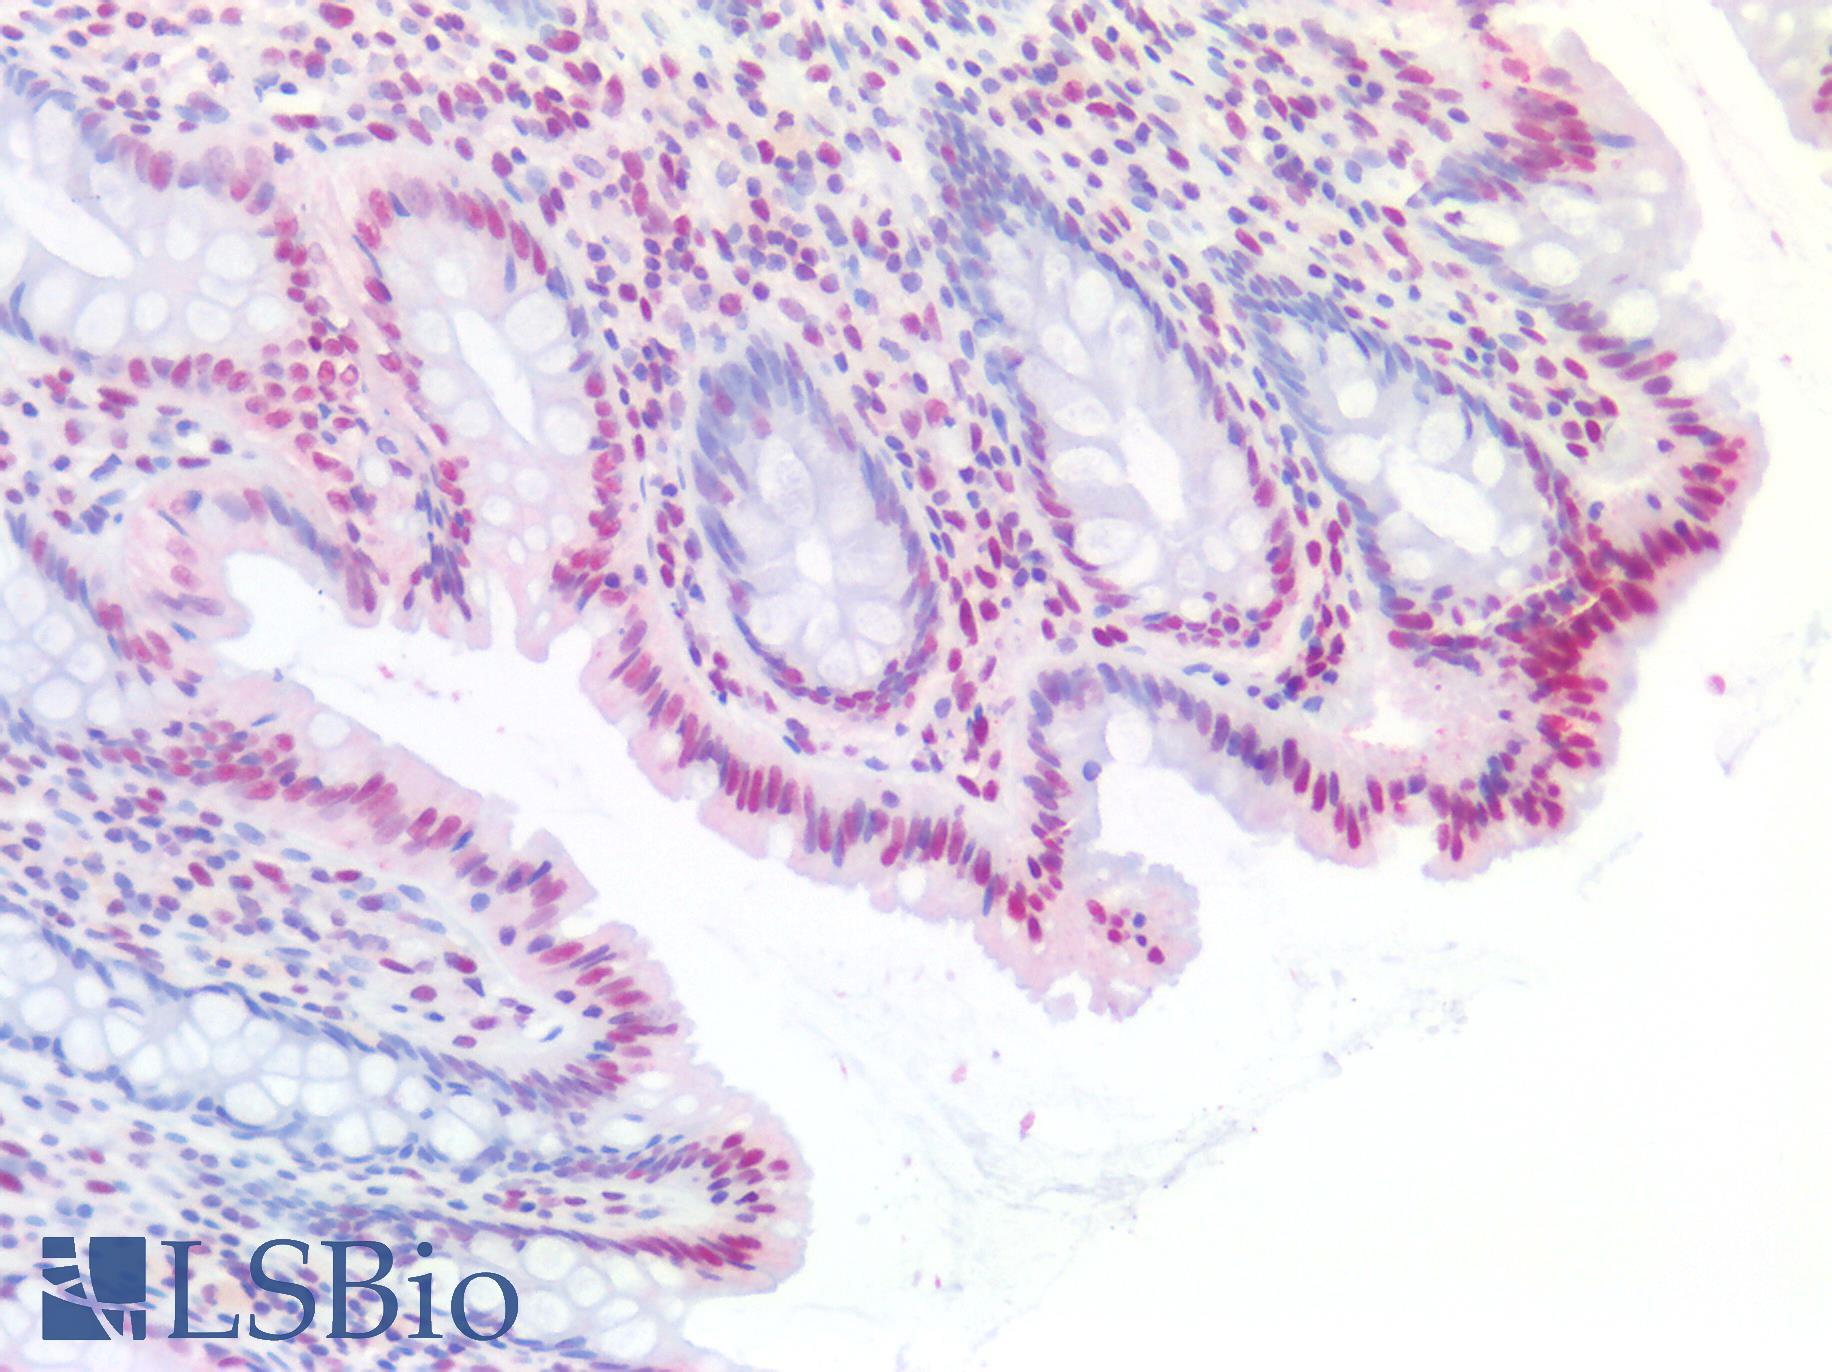 EP300 / p300 Antibody - Human Colon: Formalin-Fixed, Paraffin-Embedded (FFPE)